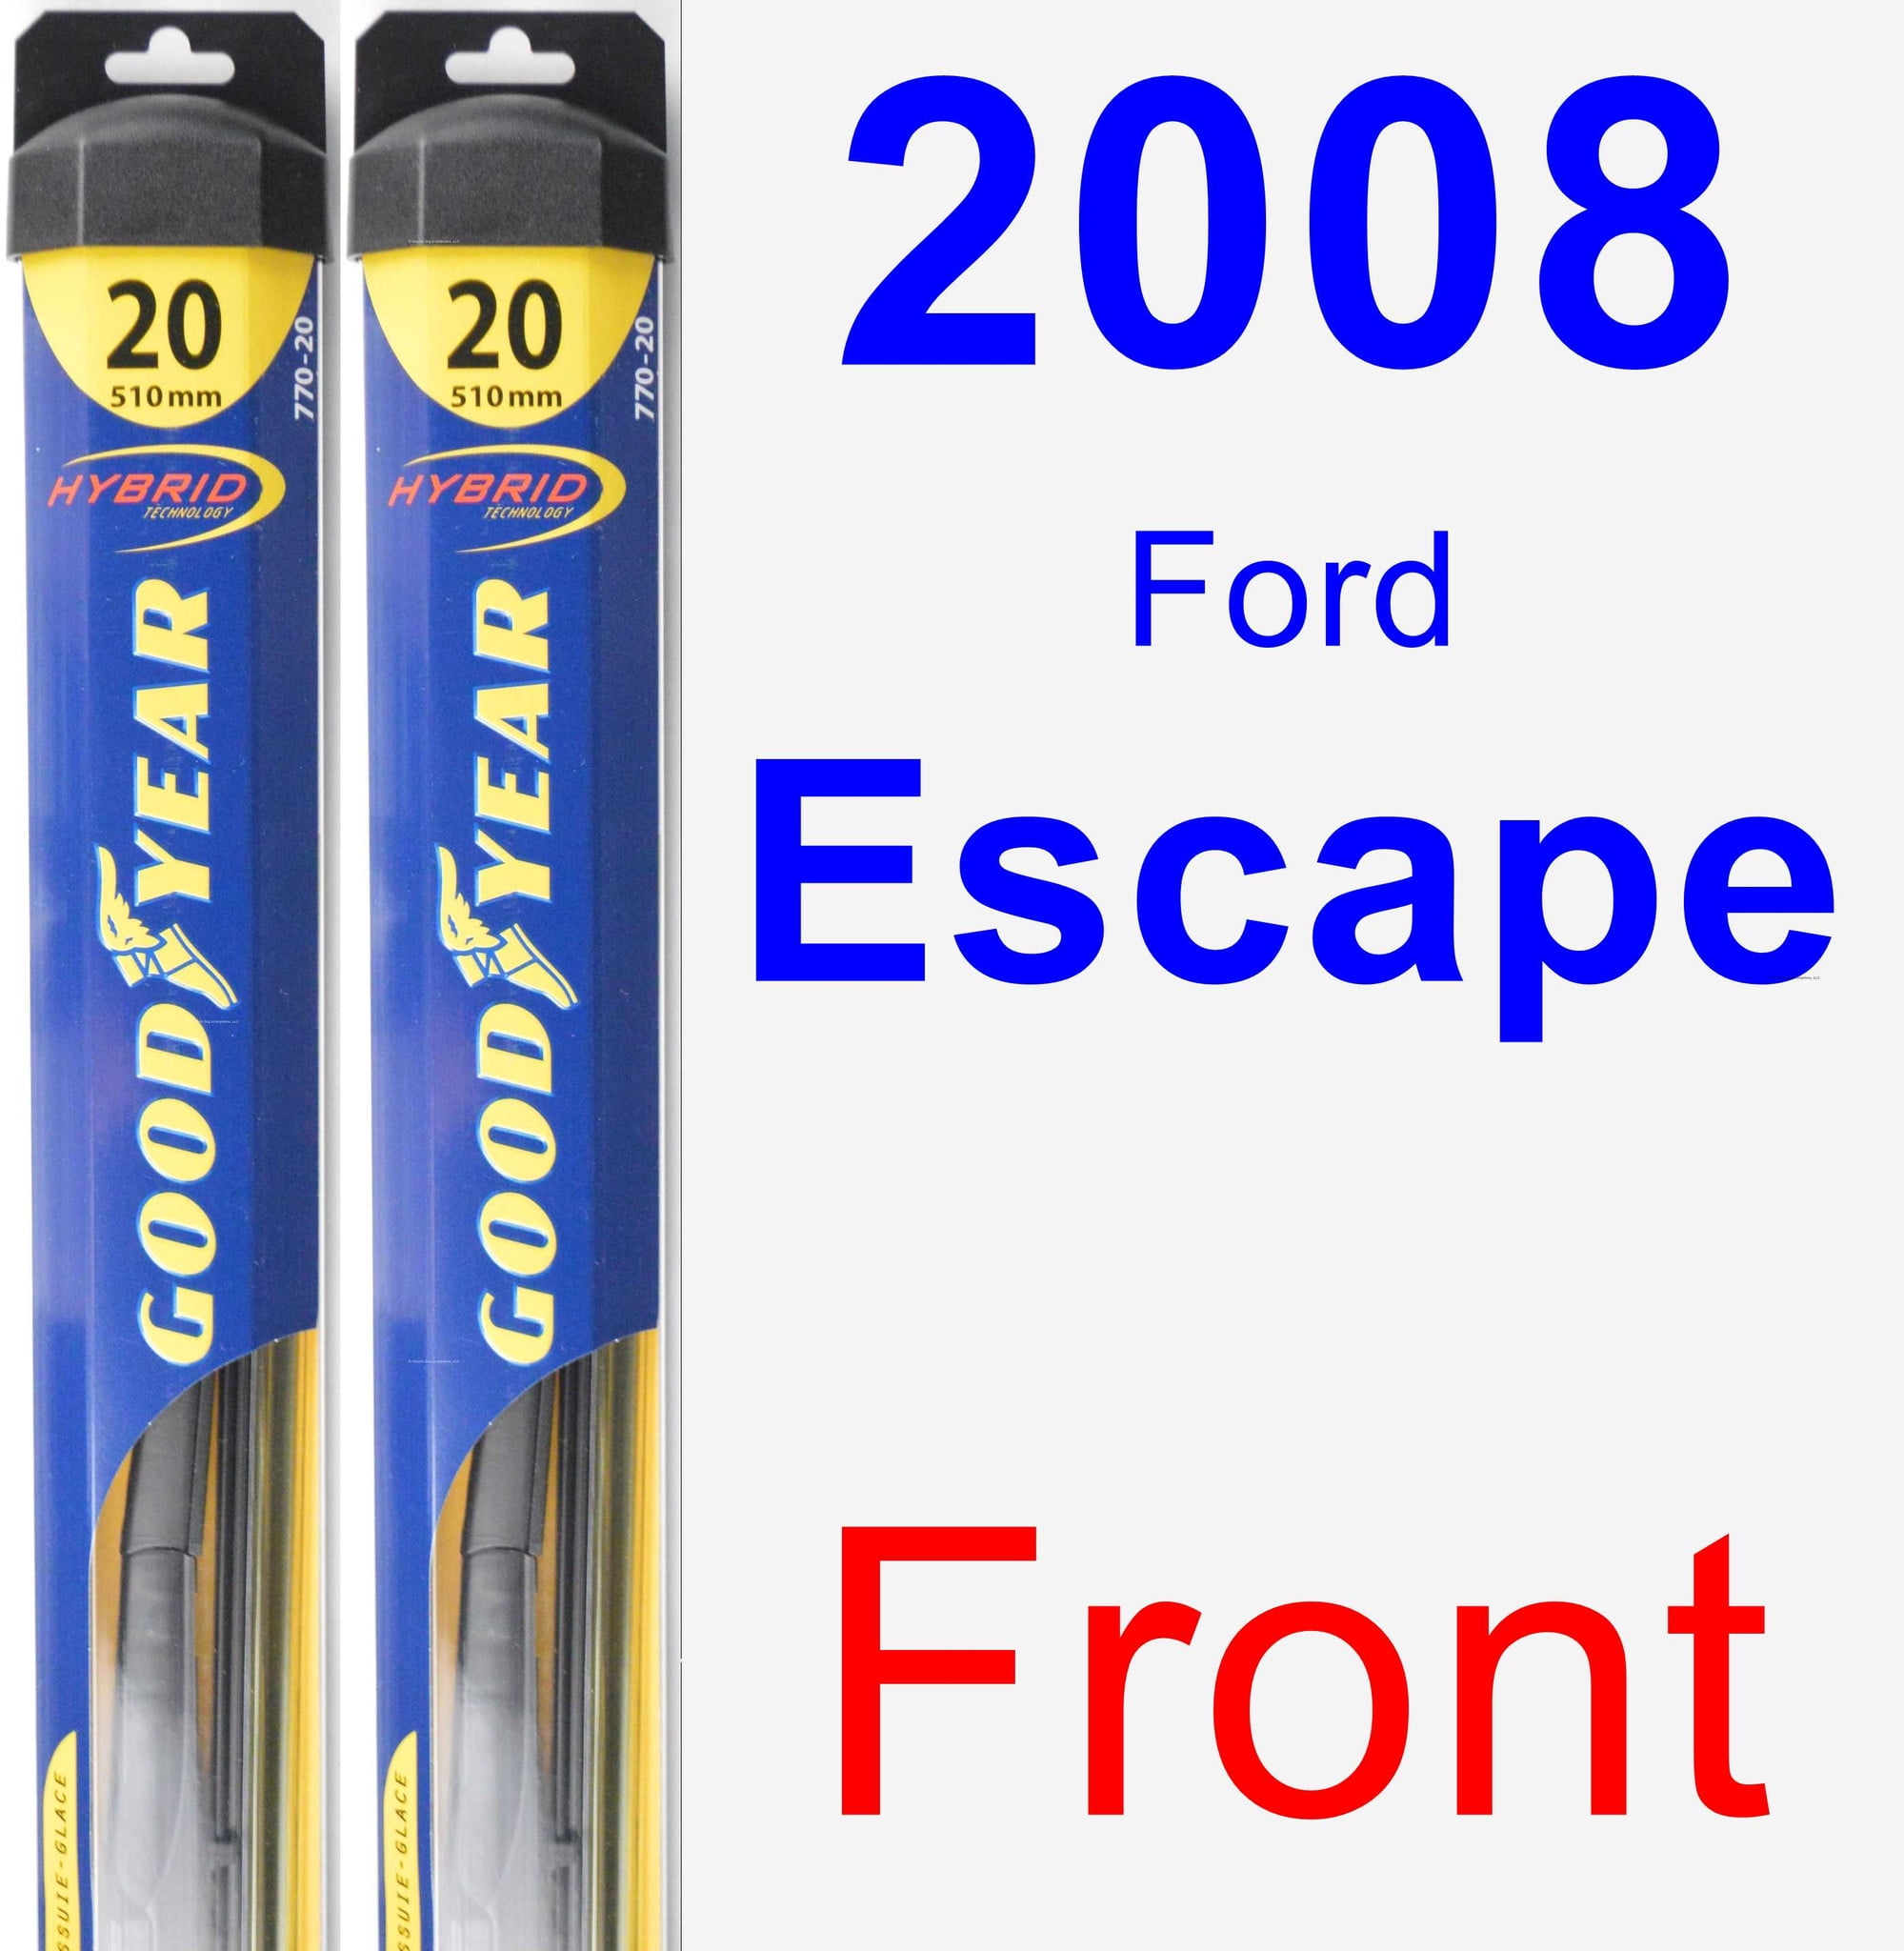 WiperTime ボッシュ ICONビームフロントワイパーブレードキットFord Escape  2008-2012年対応サイズ28"28"+WiperTimeクリーニングキット 値下げ可能